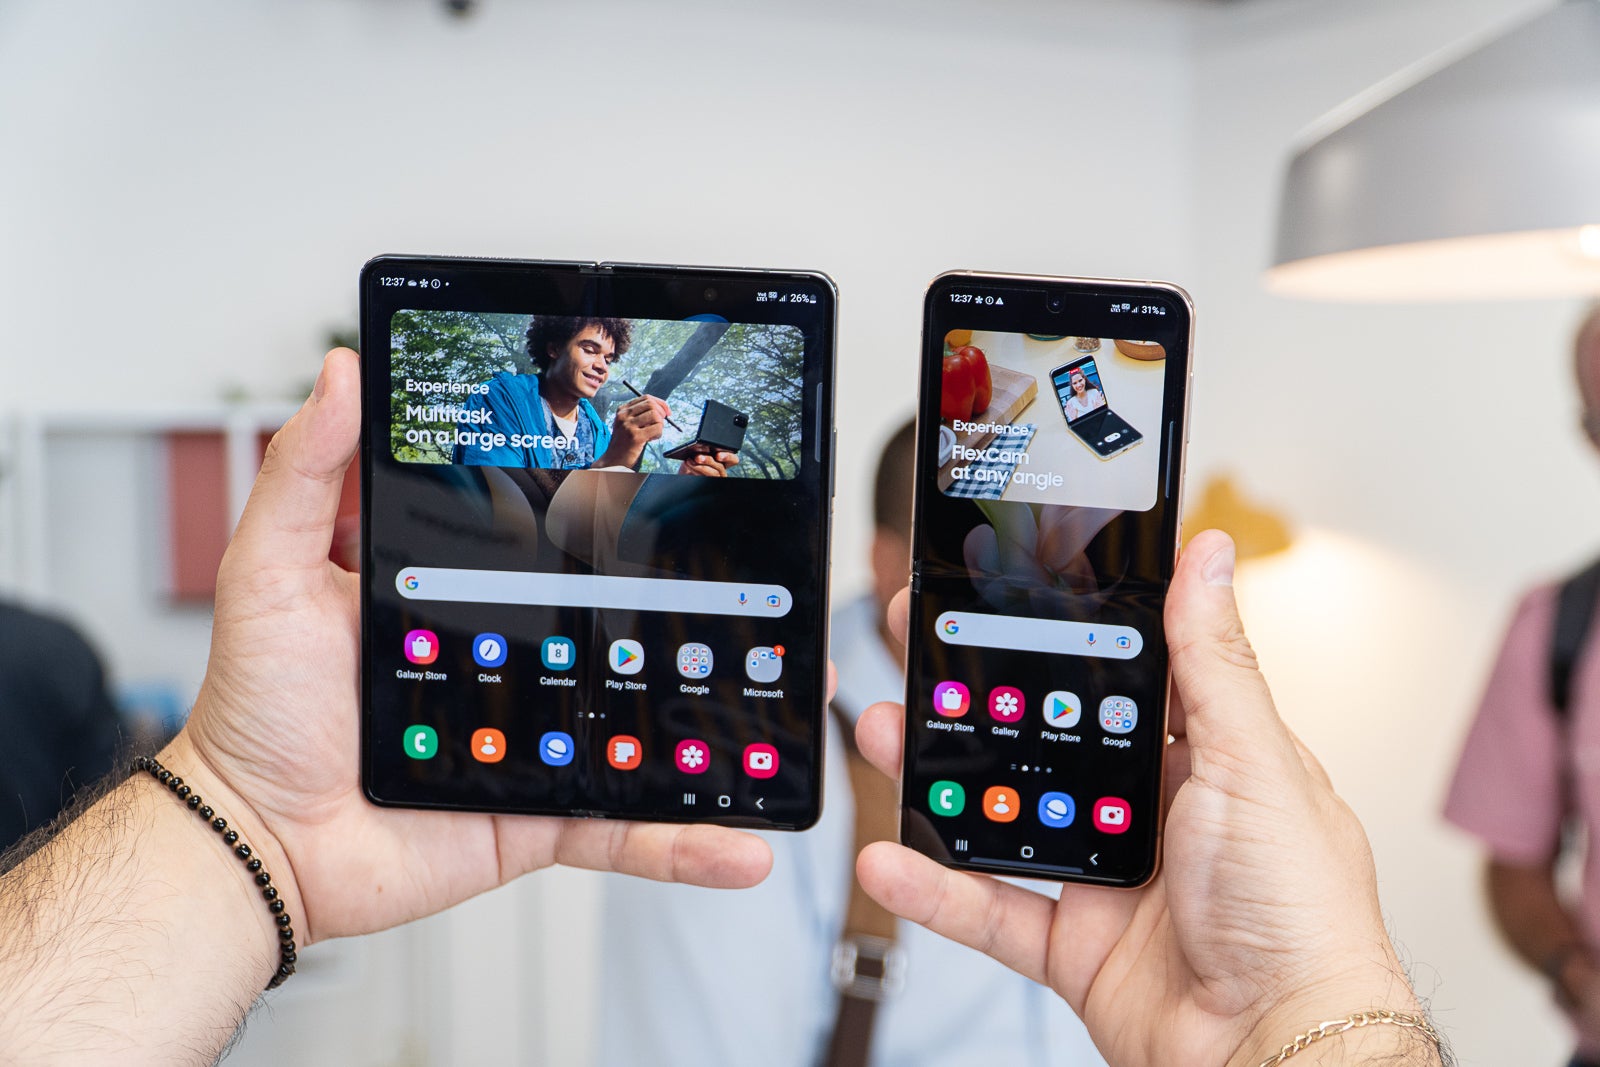 (Image credit - PhoneArena) Galaxy Z Fold 4 (left) and Z Flip 4 (right) - displays - Samsung Galaxy Z Fold 4 vs Galaxy Z Flip 4 comparison: For two vastly different demographics